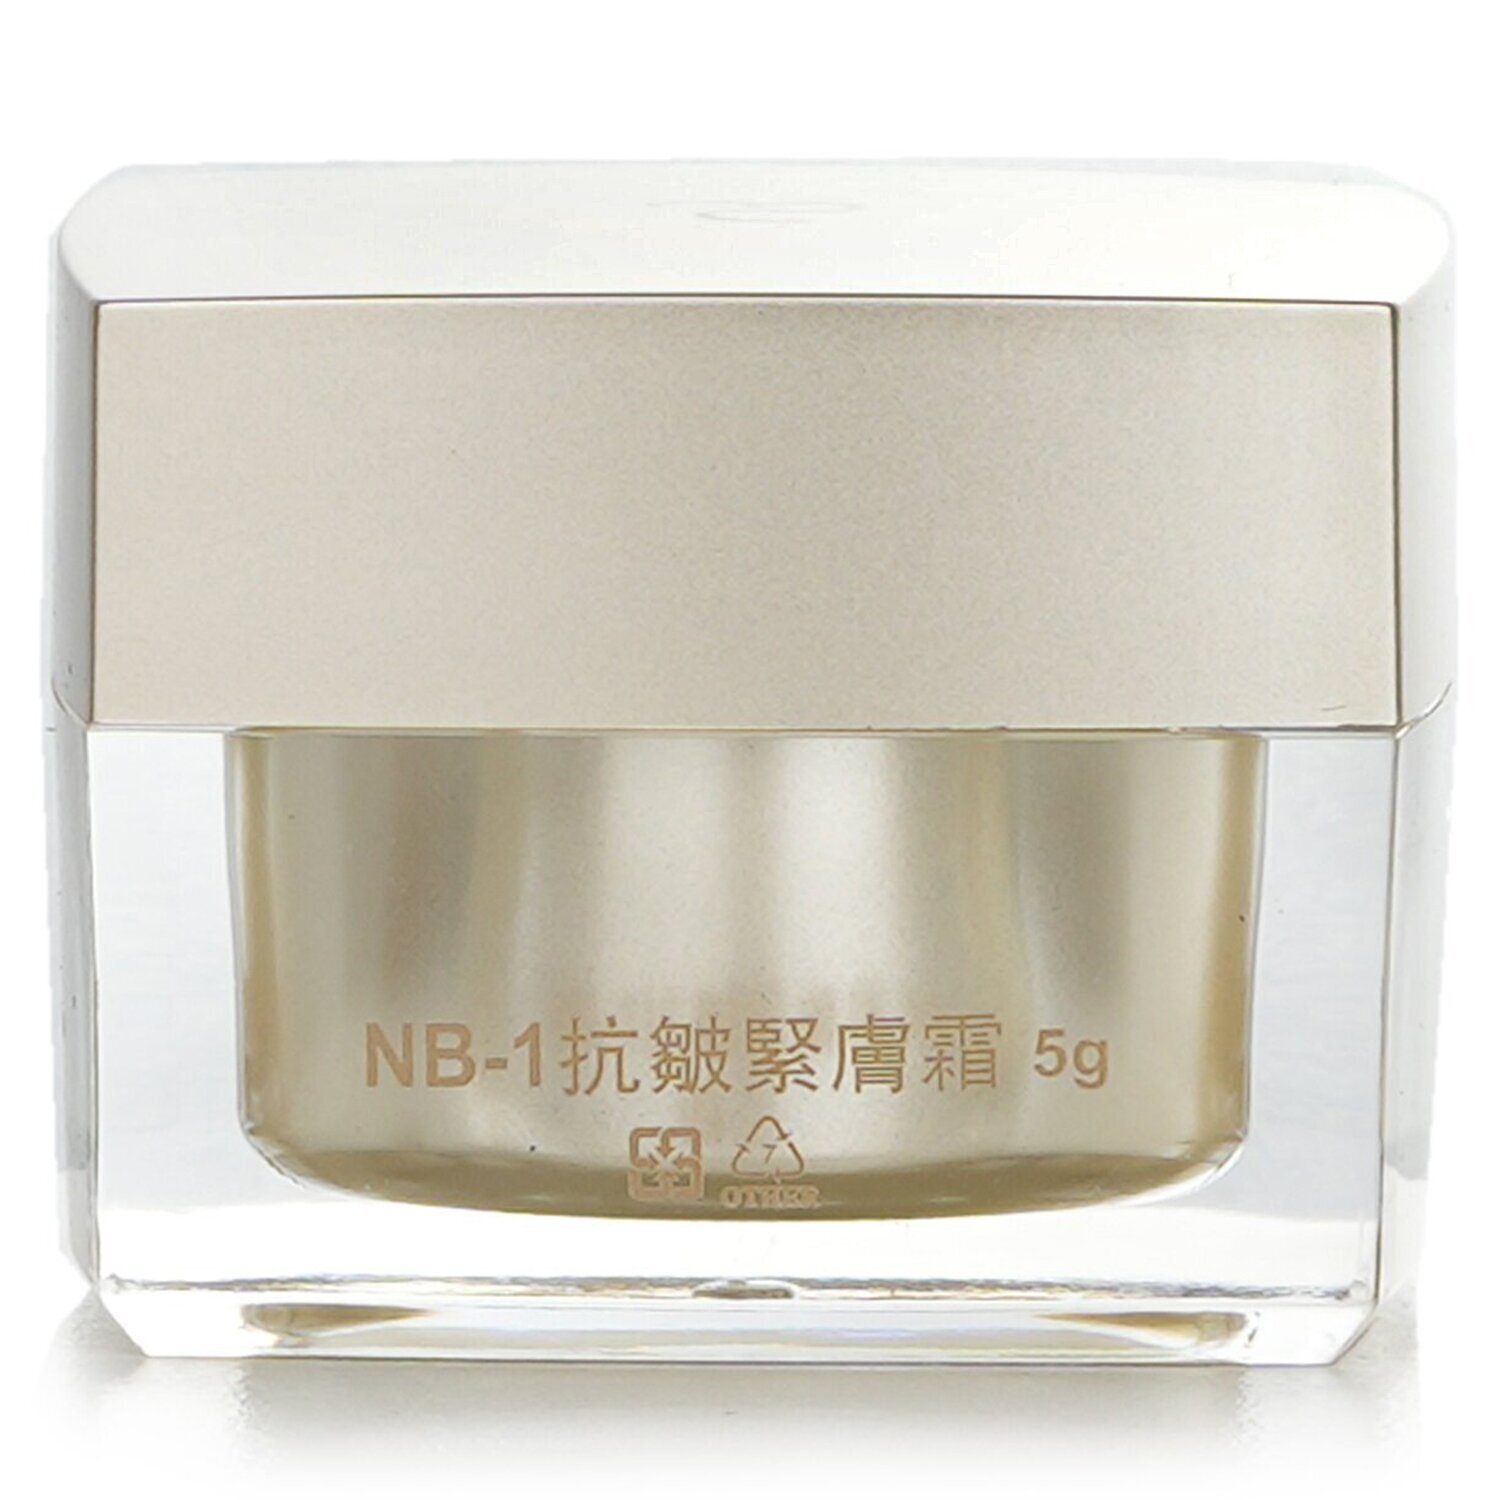 Natural Beauty NB-1 Anti-Wrinkle Firming Creme (Exp. Date: 03/2024) 5g